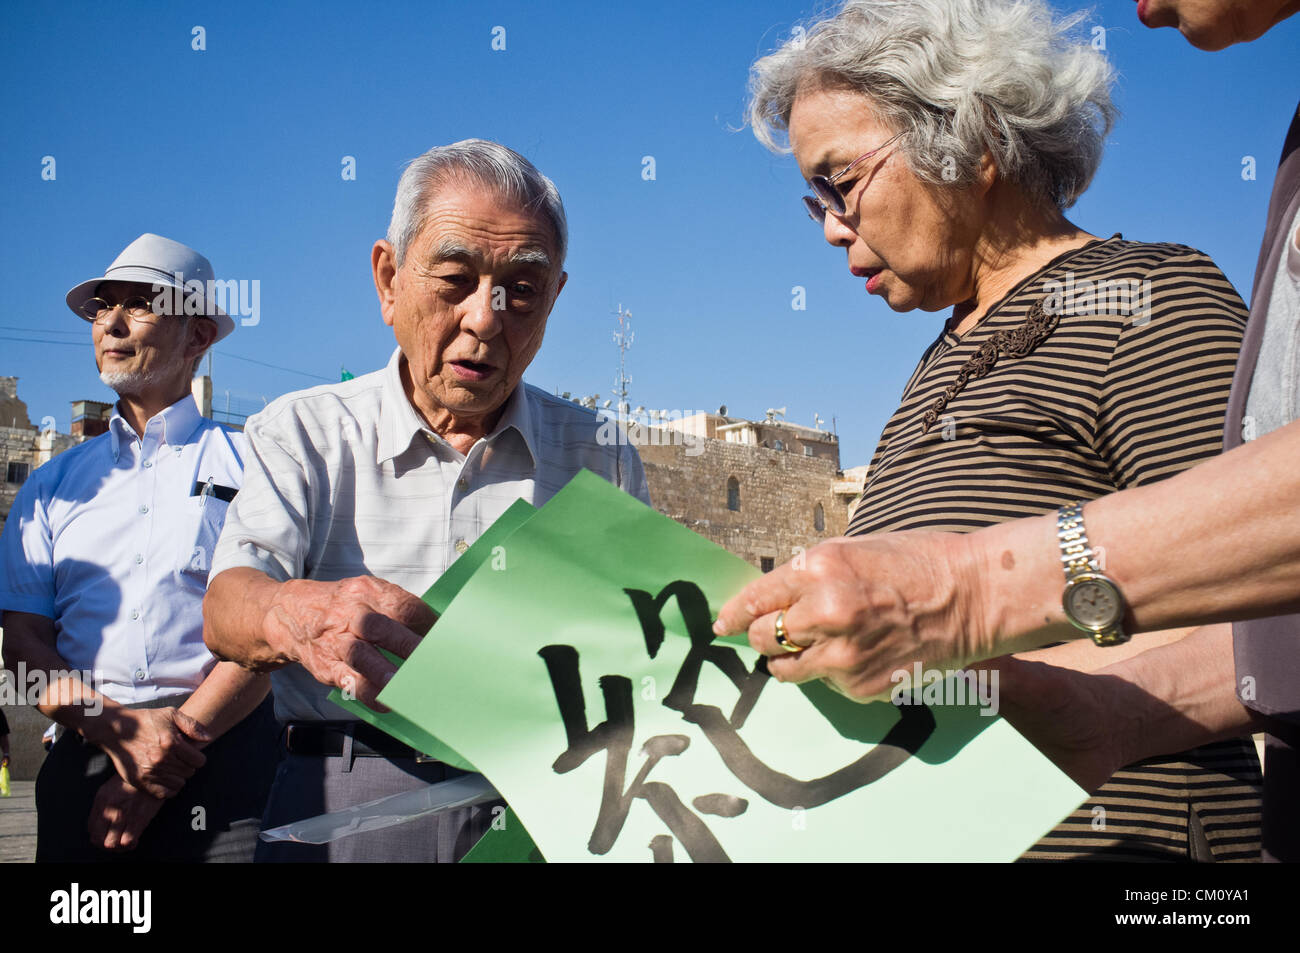 Hibakusha, Hiroshima children survivors, prepare three pages of kanji that together comprise “nuclear abolition” at the Western Wall. Jerusalem, Israel. 10-September-2012.   Hibakusha, survivors of the August 6th, 1945 bombing of Hiroshima, visit Israel to promote  nuclear abolition. Calling “No More Hiroshimas, No More Nagasakis!” they place their prayers between the Kotel stones. Stock Photo